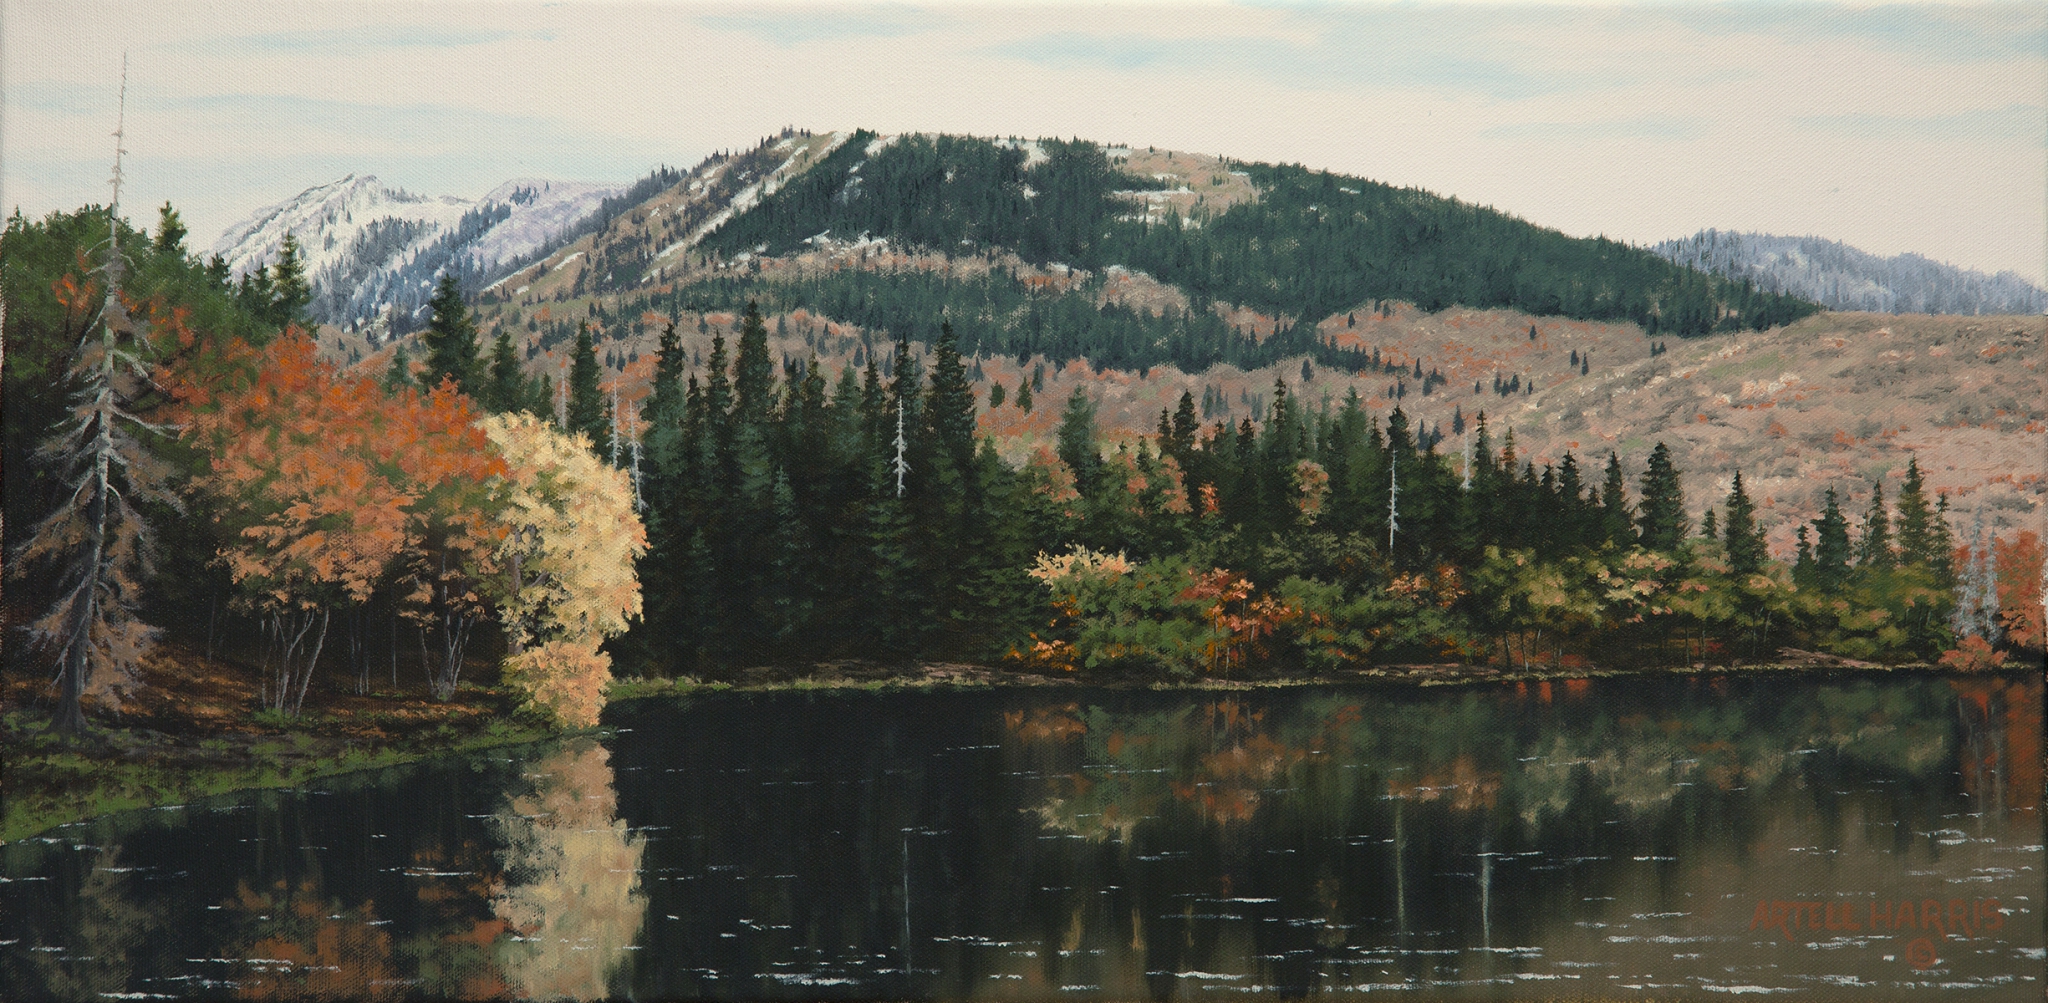 Click here to view Payson Lake by artell harris